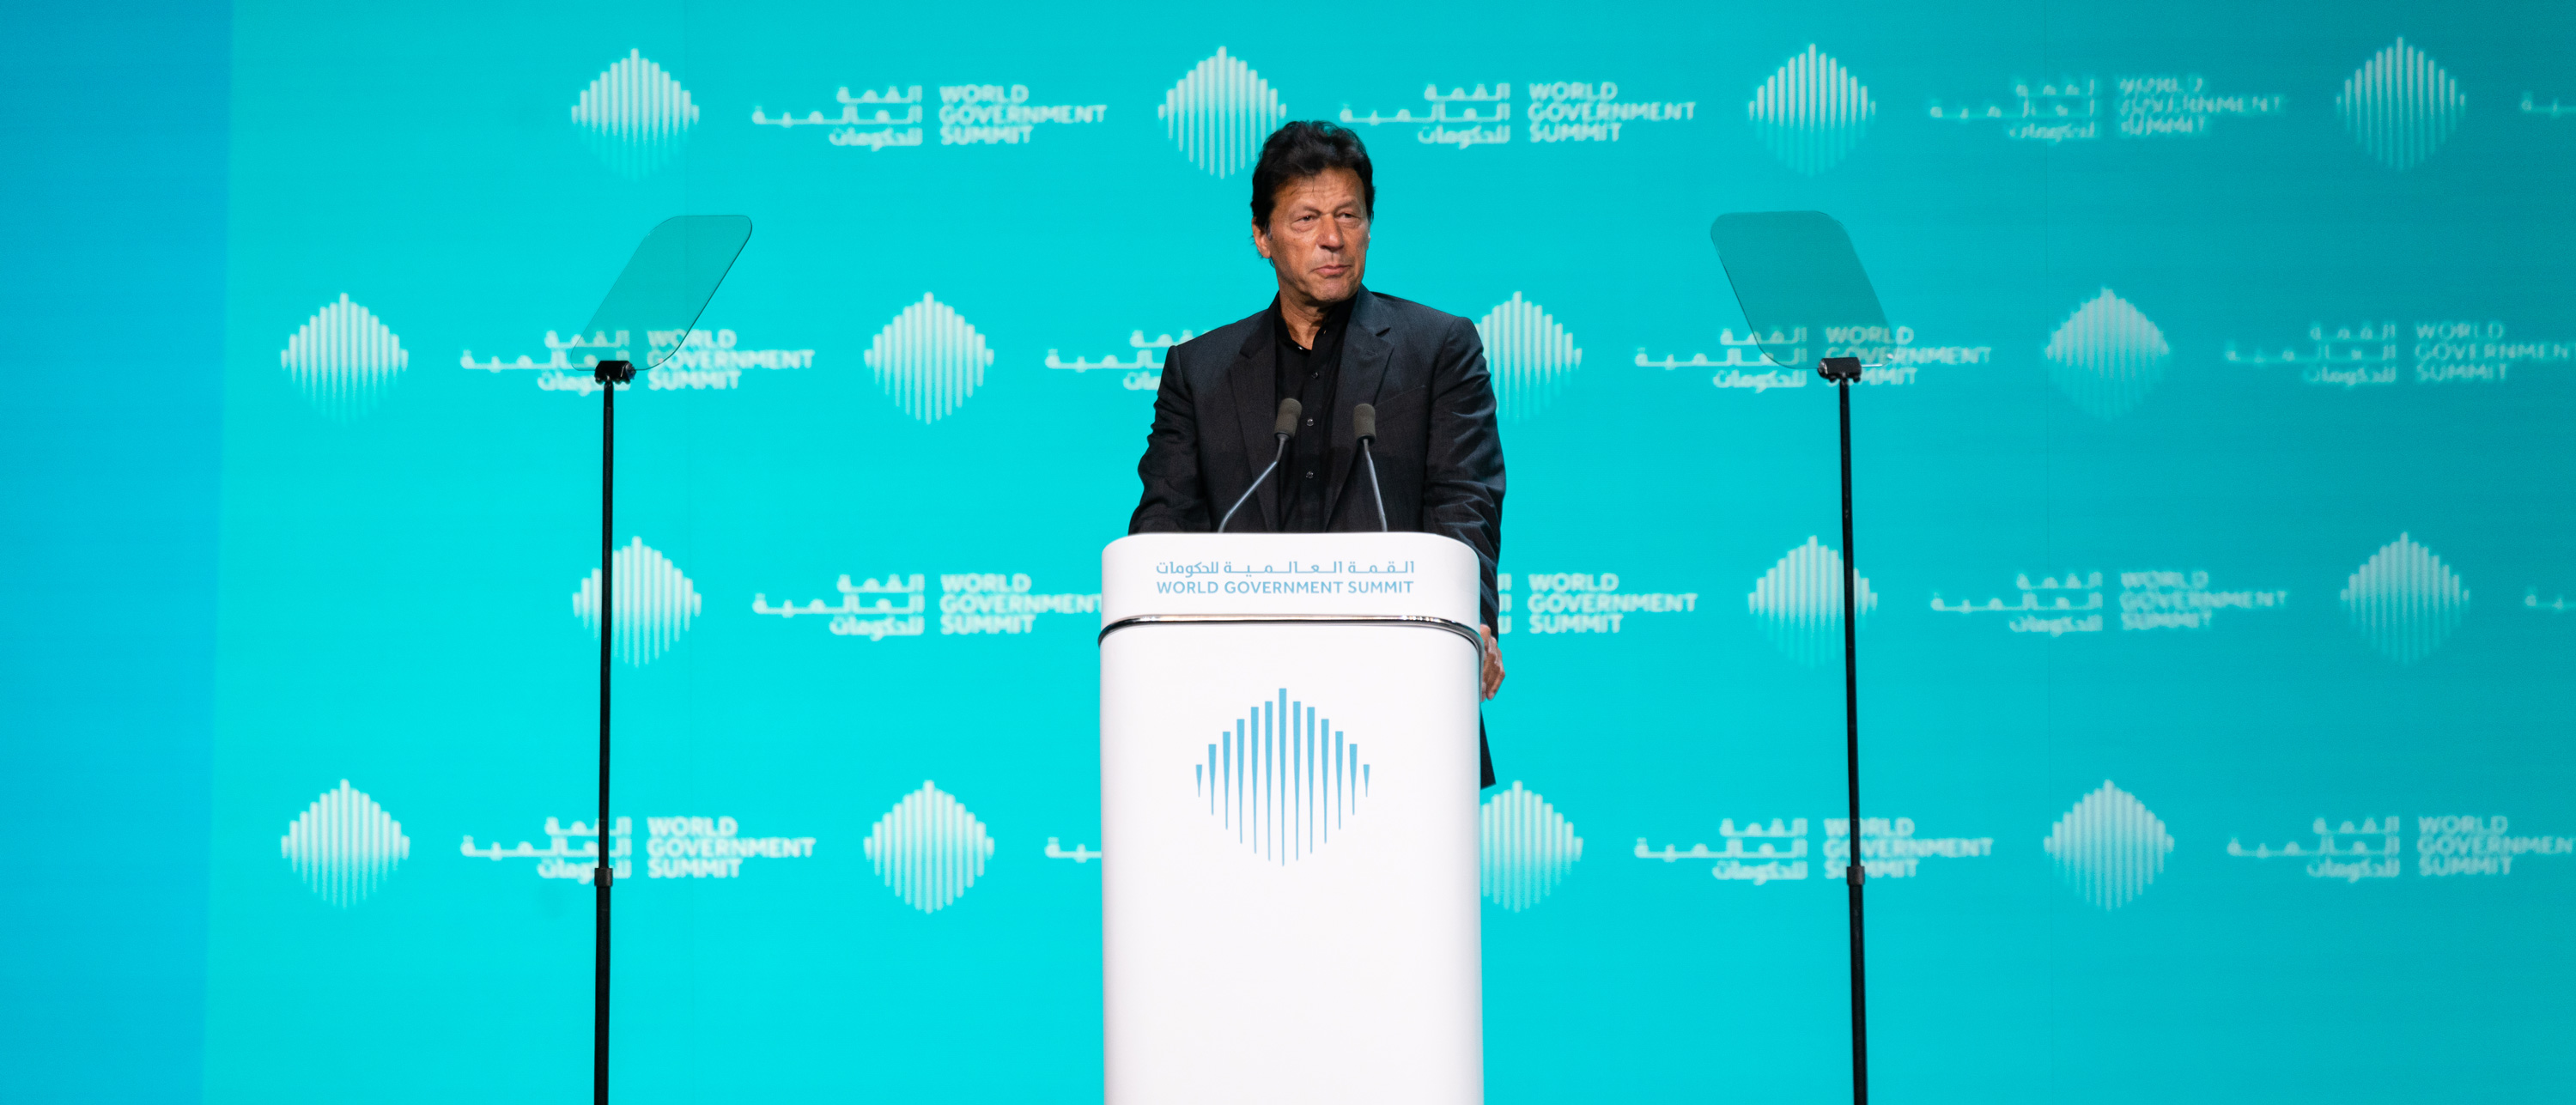 World Government Summit 2019: You lose when you give up, says Imran Khan